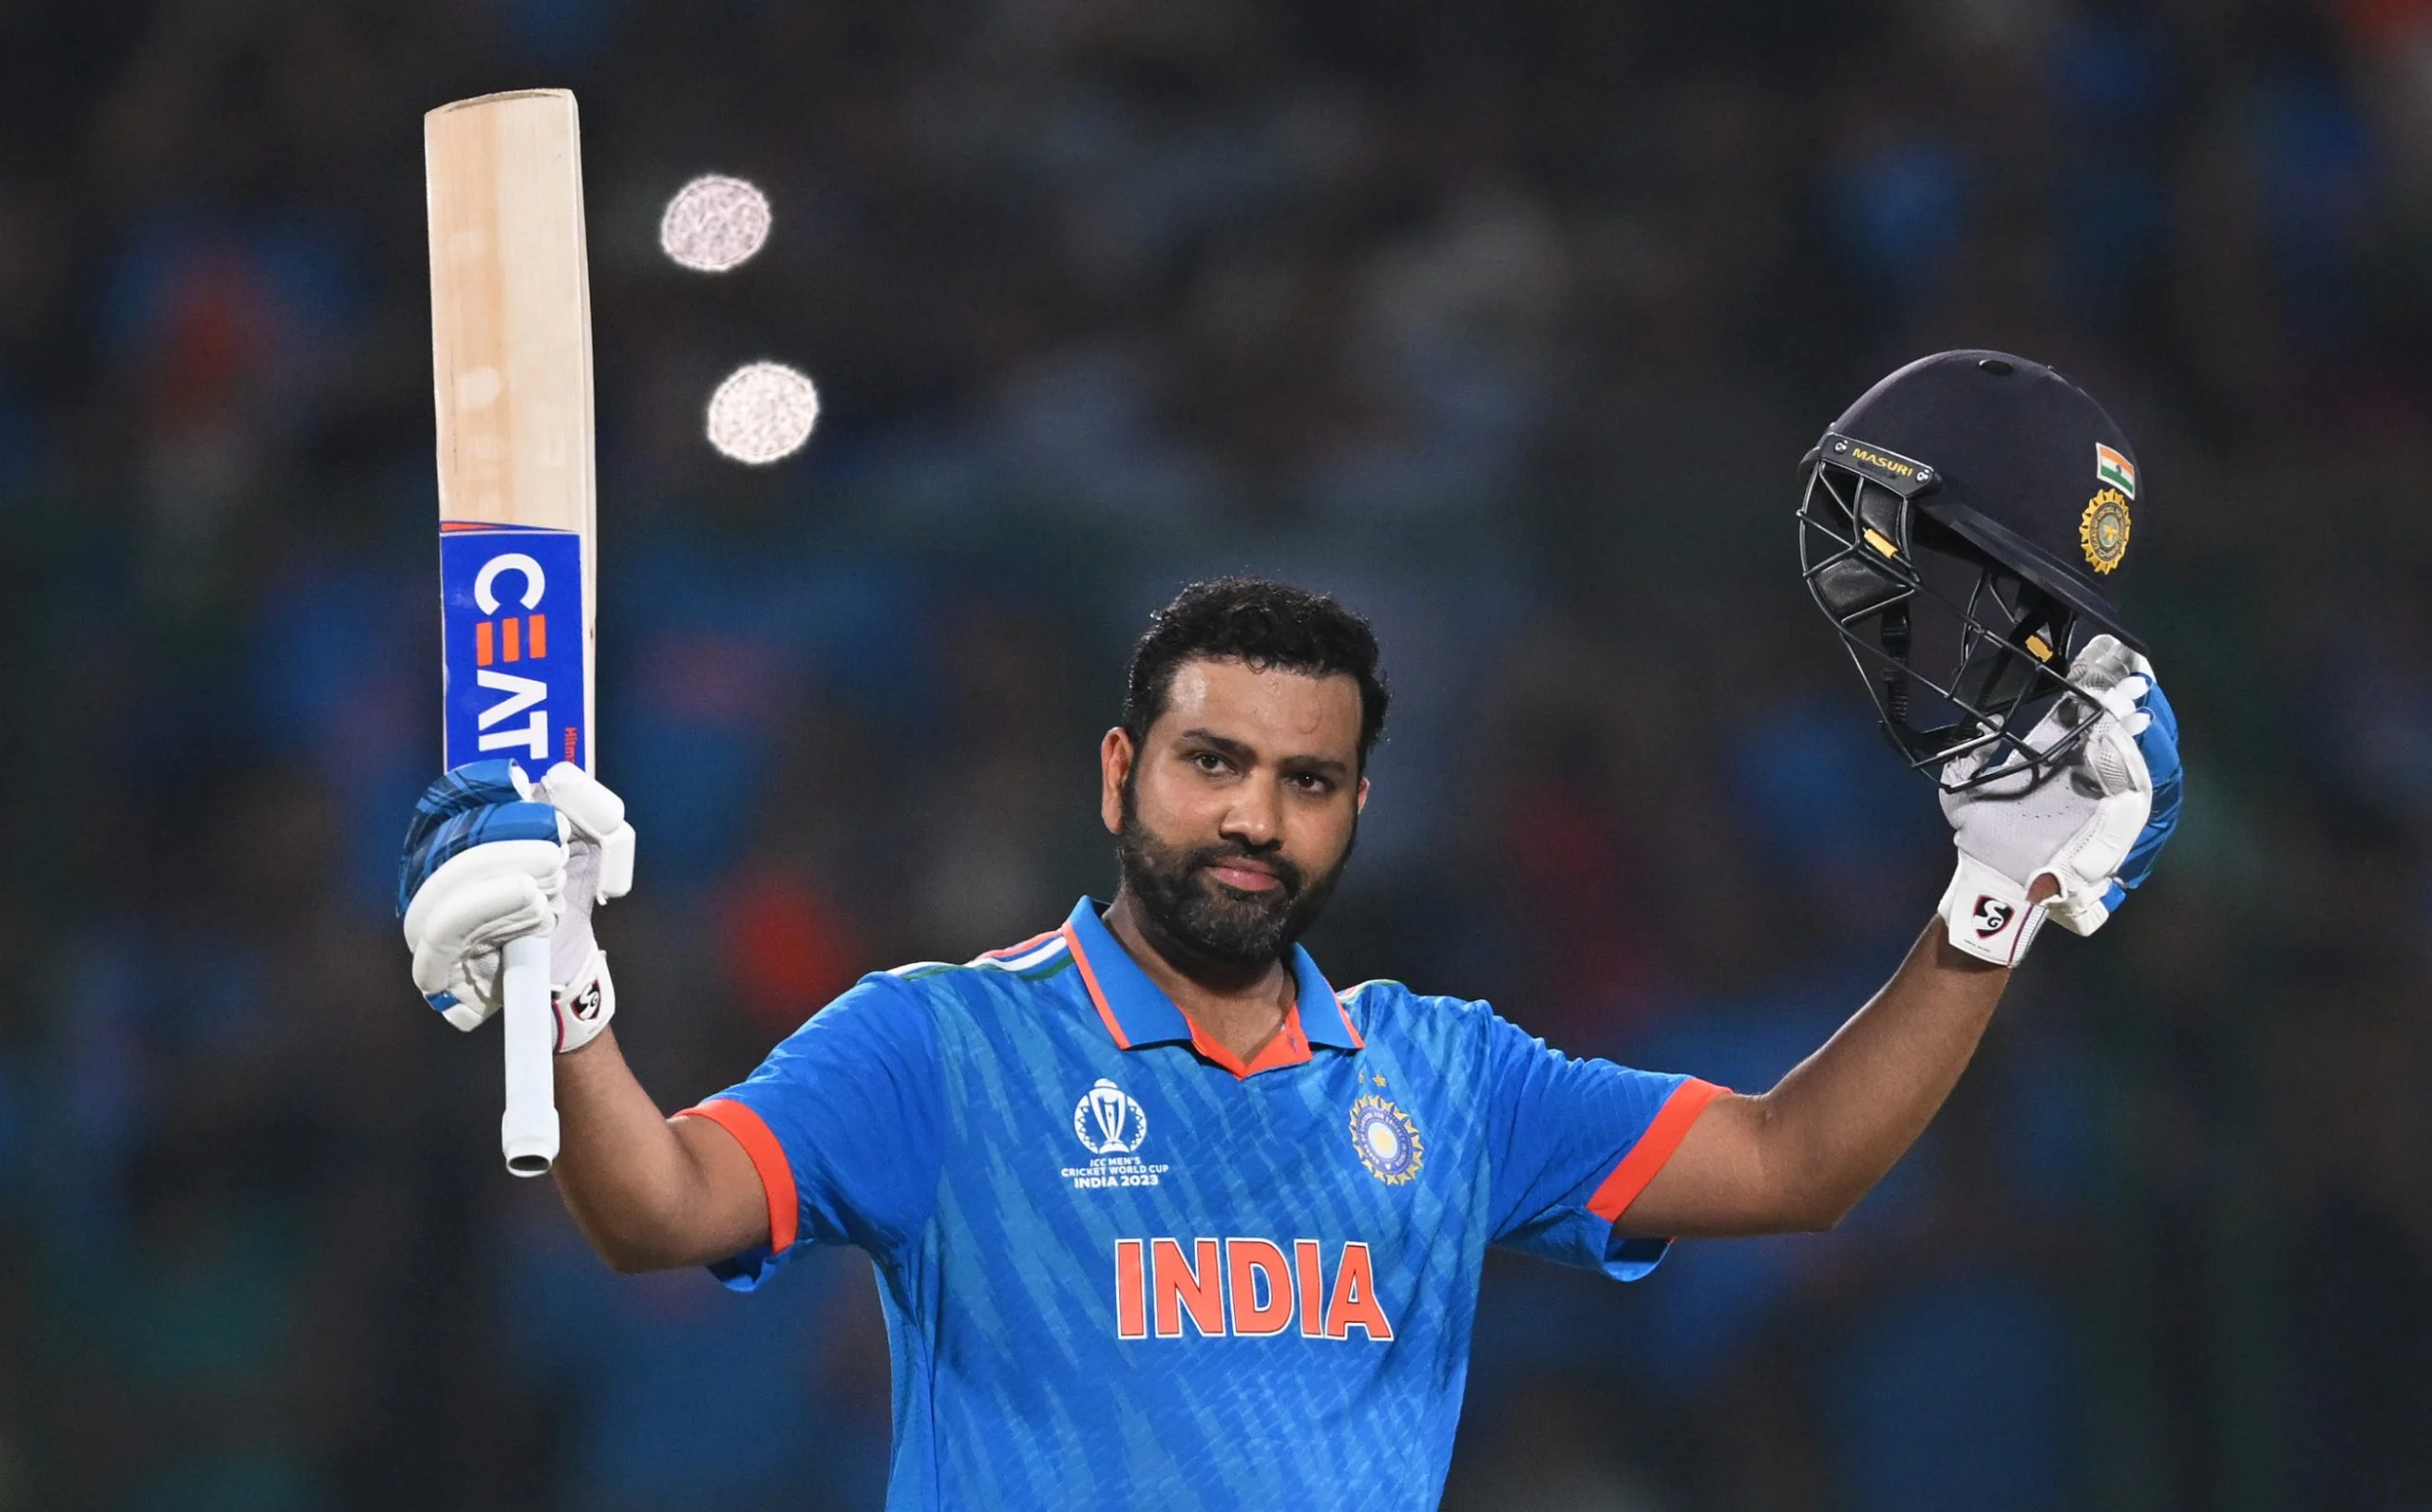 Watch: Ritika Asks "Am I A Better Wife Or Manager?" Rohit Sharma Gives An Epic Reply